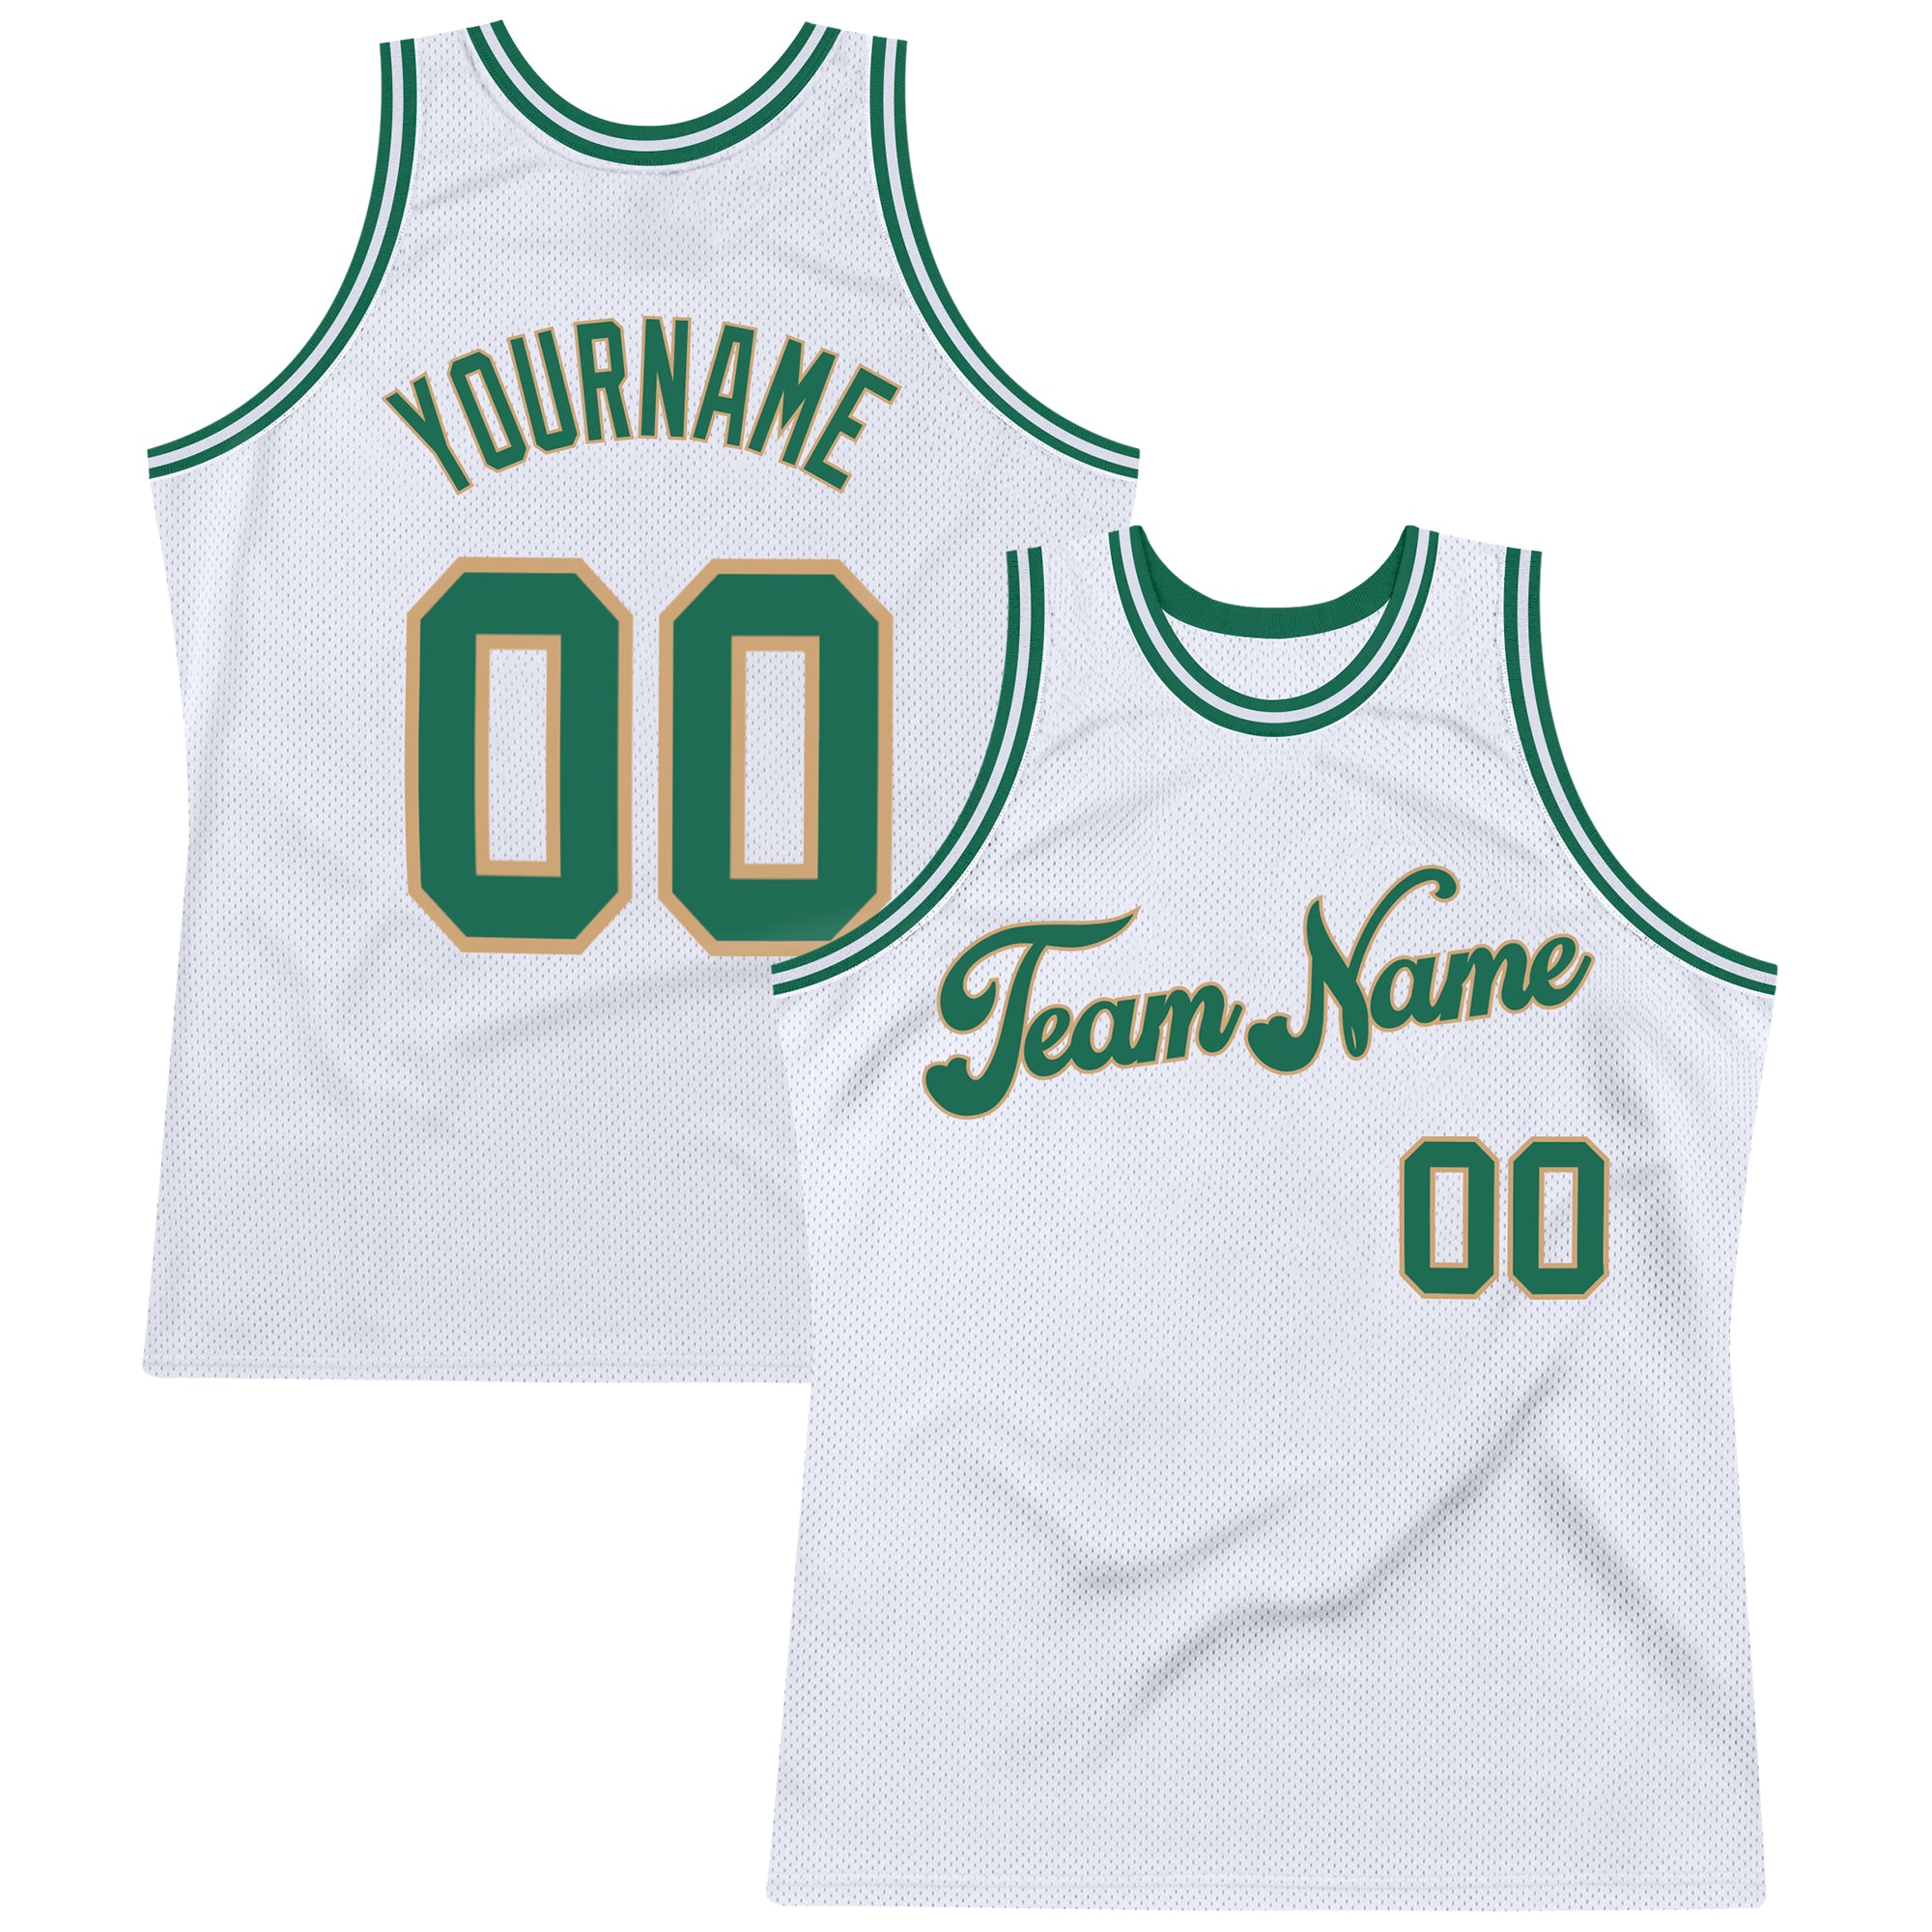 Custom Team Gold Basketball Authentic Kelly Green Throwback Jersey White